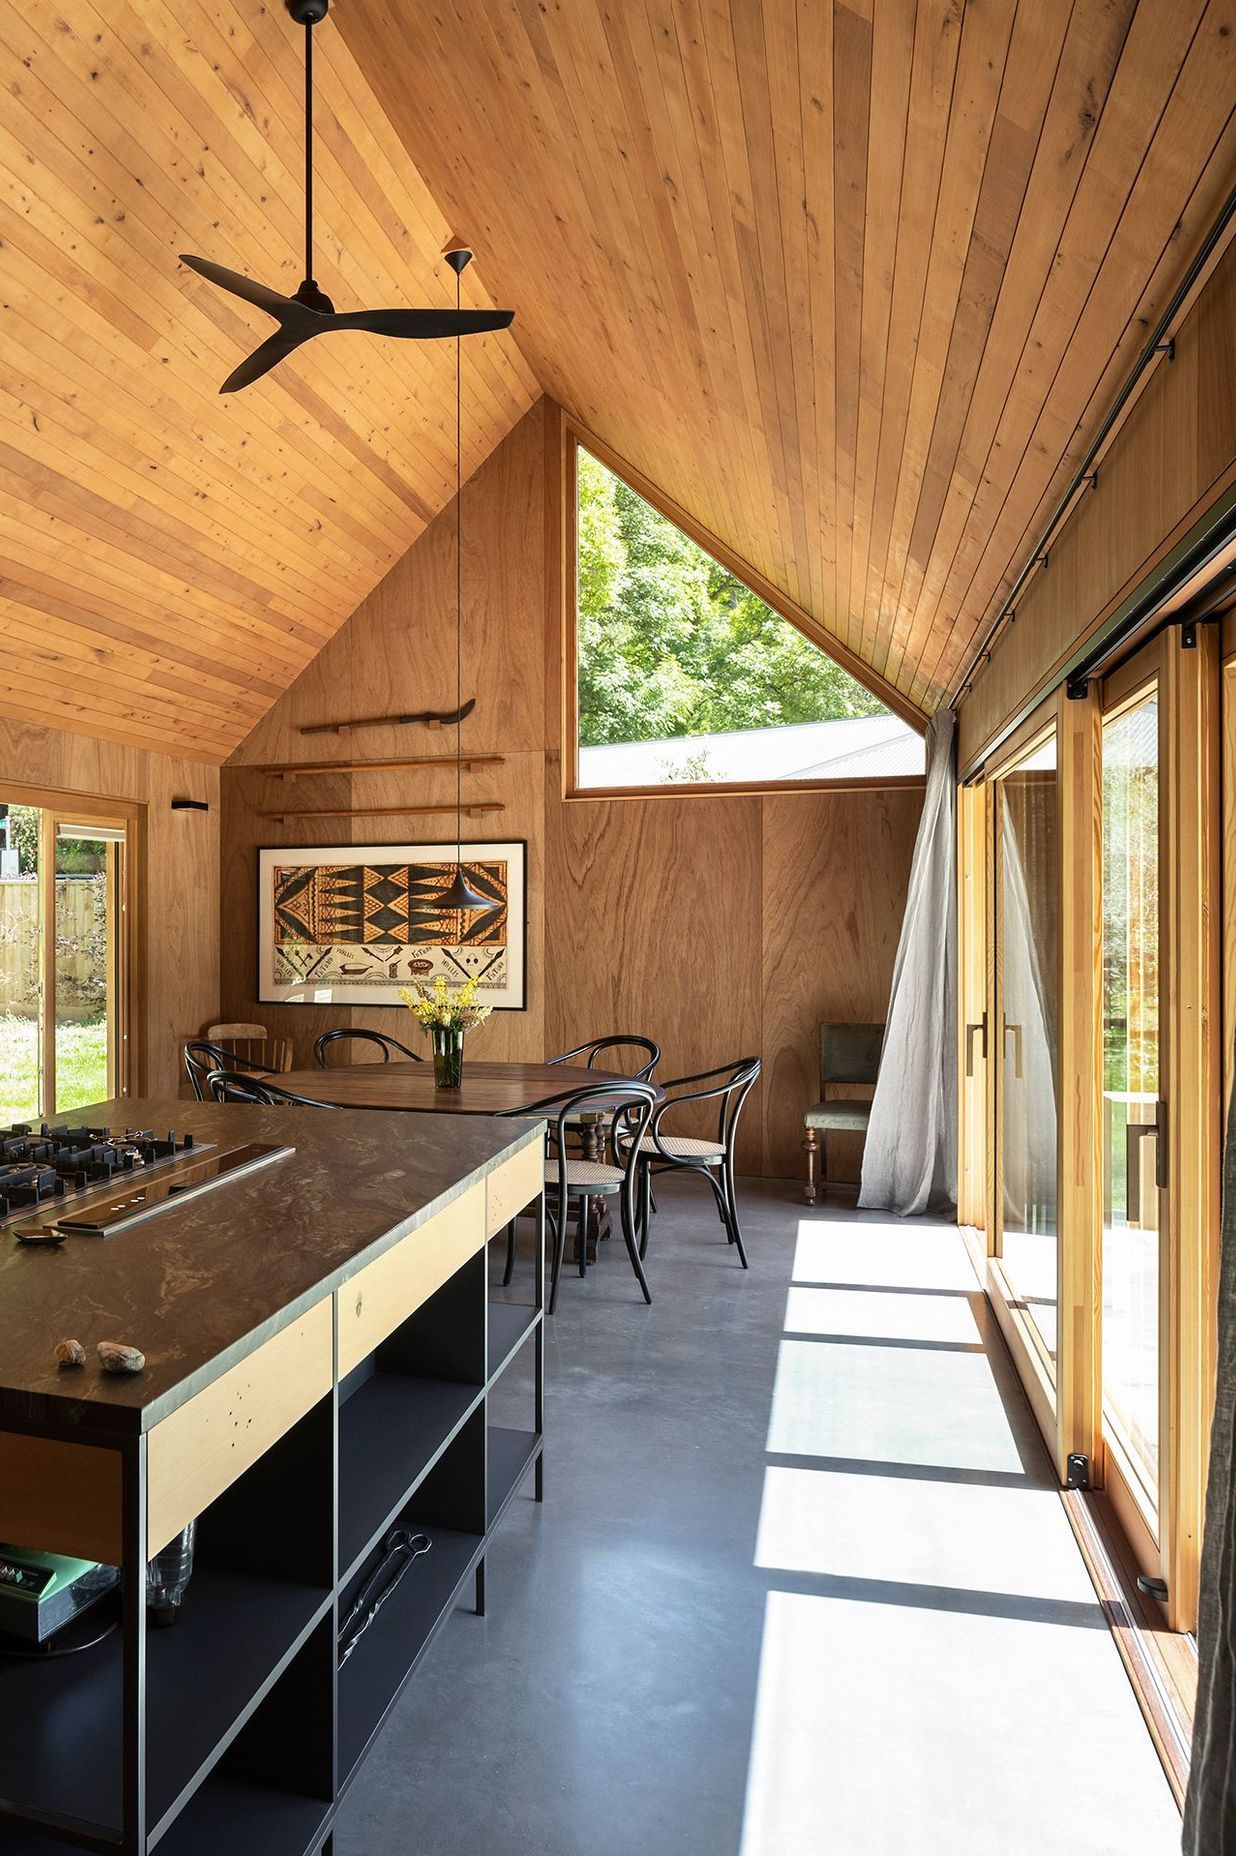 One of the largest triangular windows in this home is in the lofty dining area. 